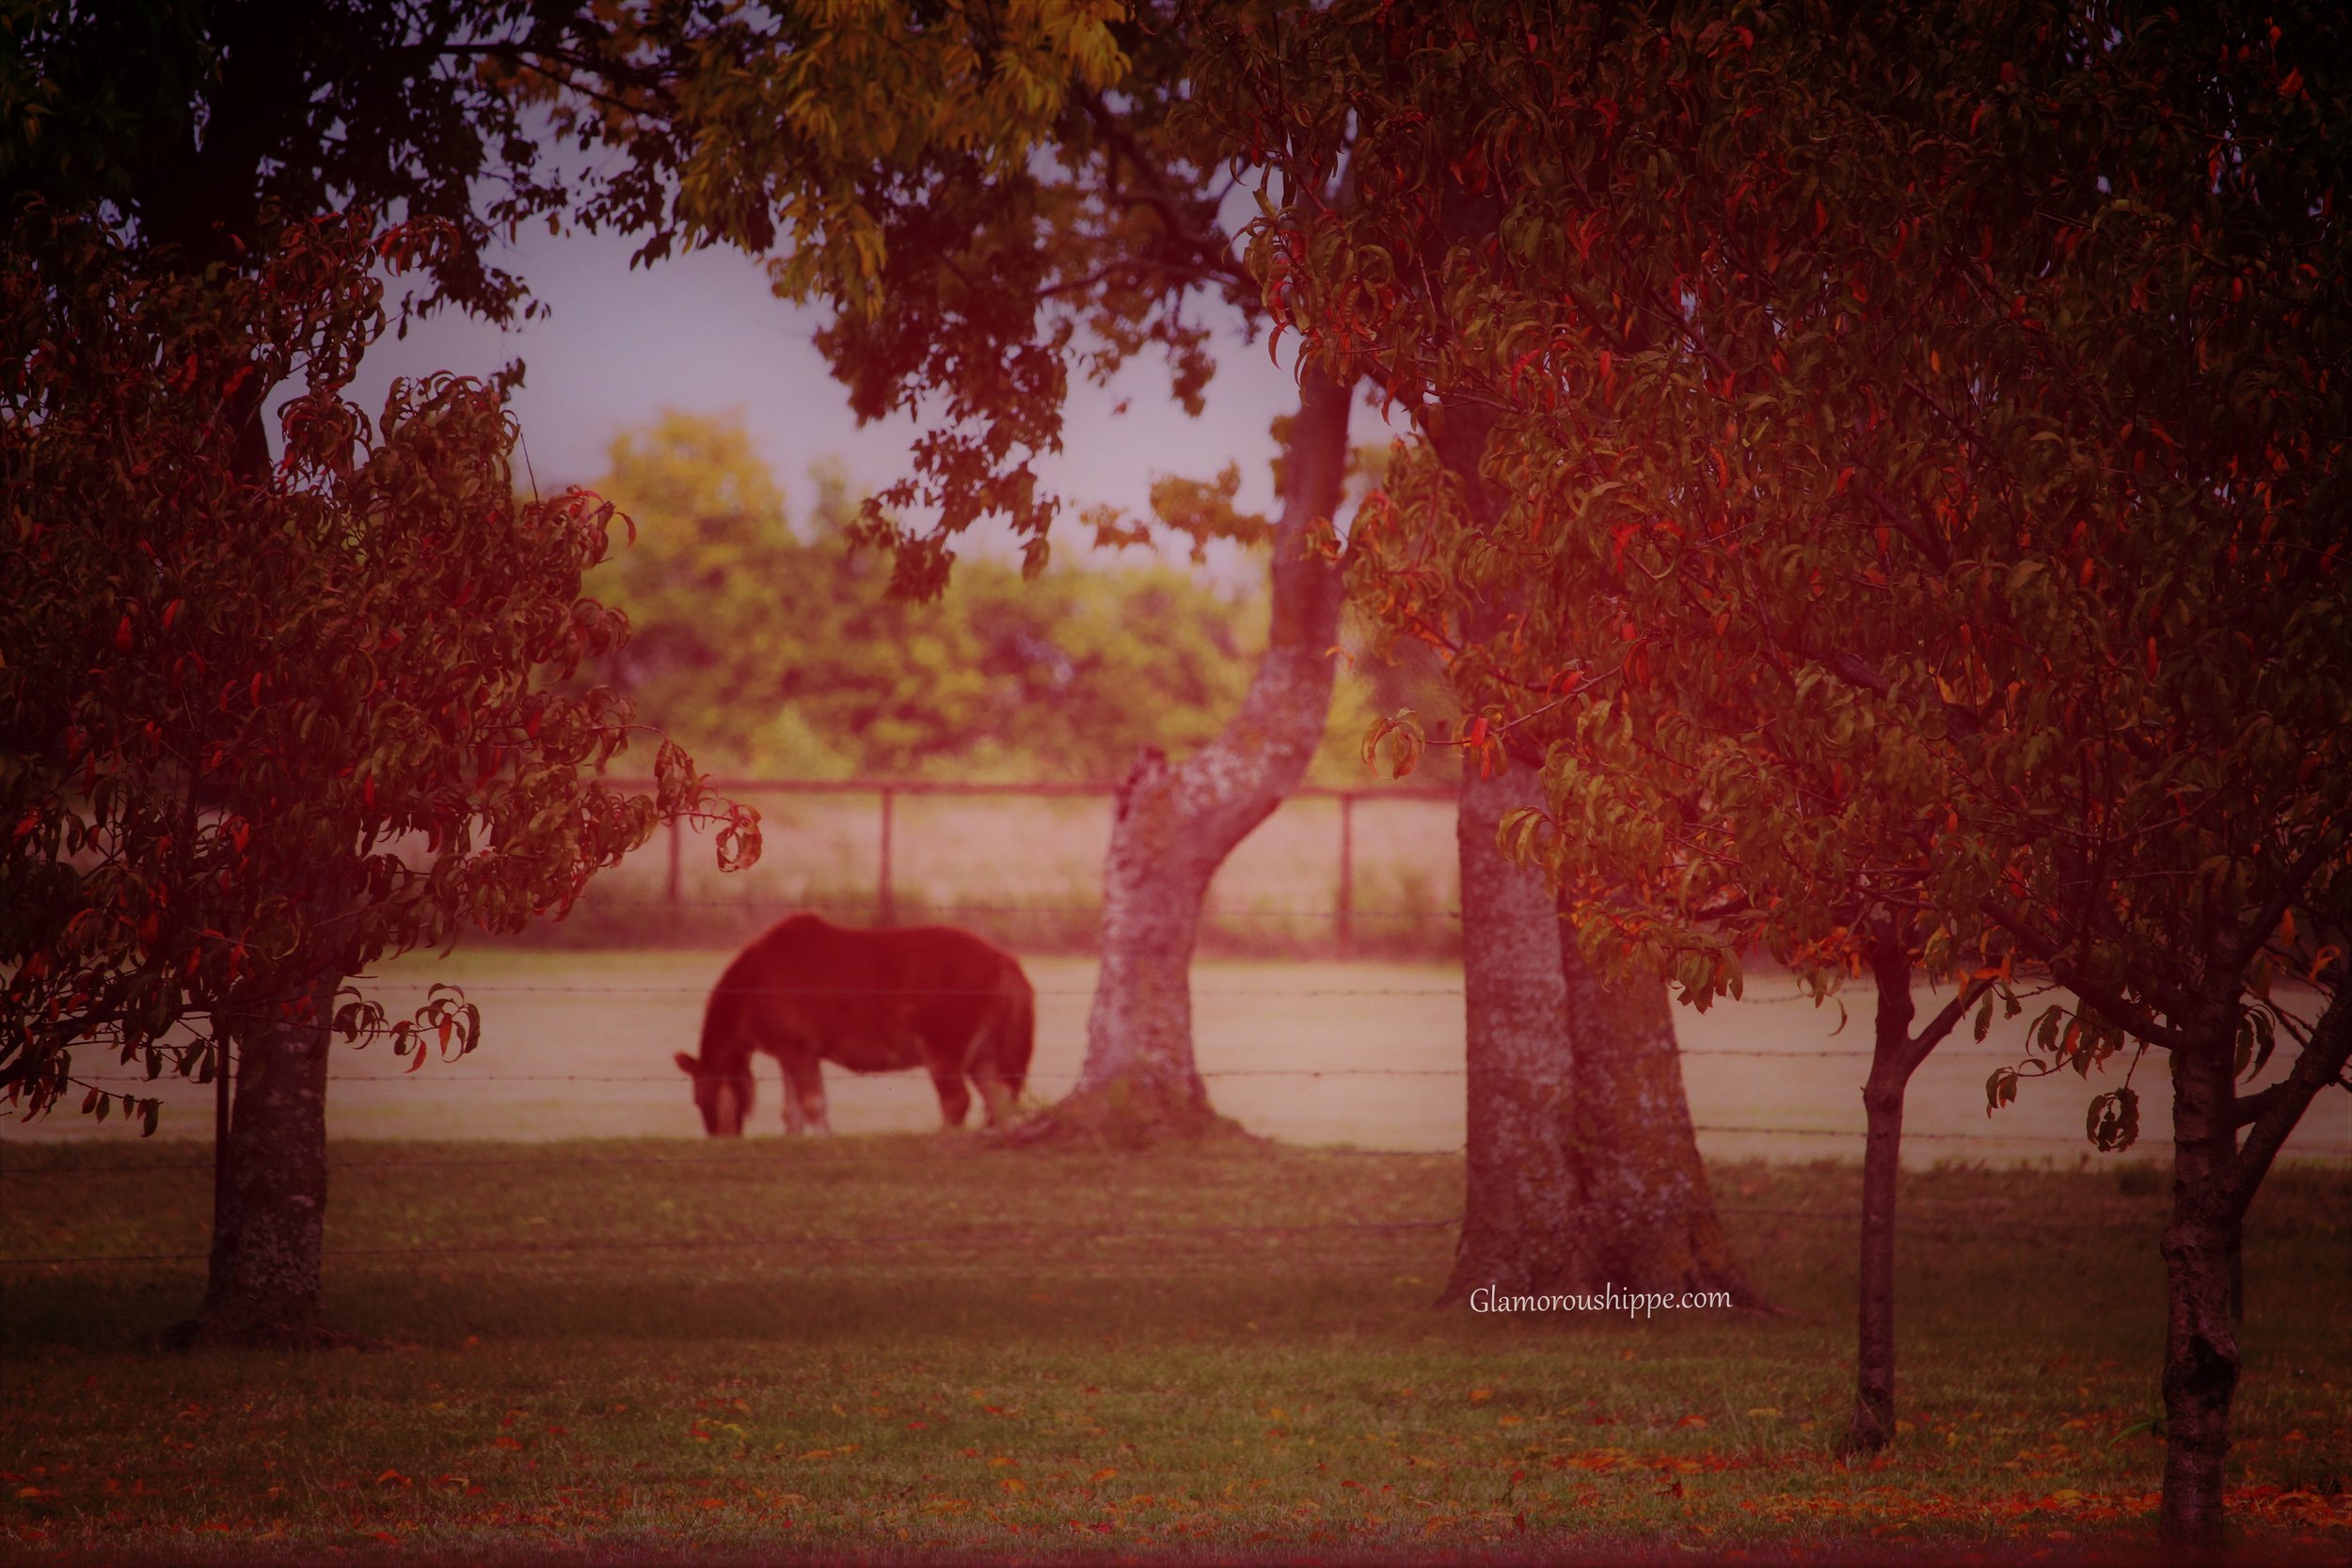 trees and horses with gh words.jpg